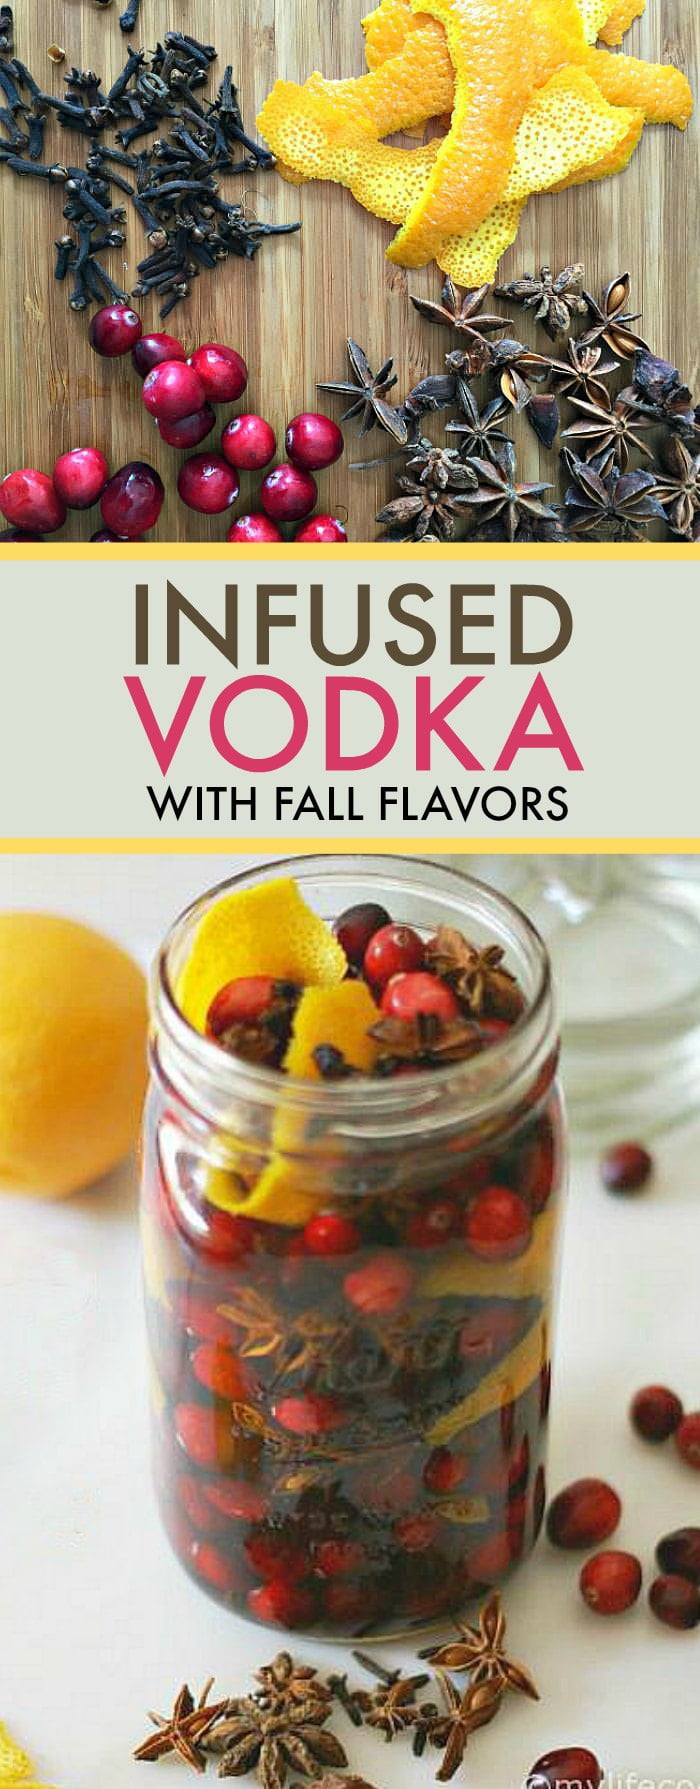 Enjoy the flavors of fall in the infused vodka using cranberries, oranges, cloves and star anise. A great low carb drink for fall.